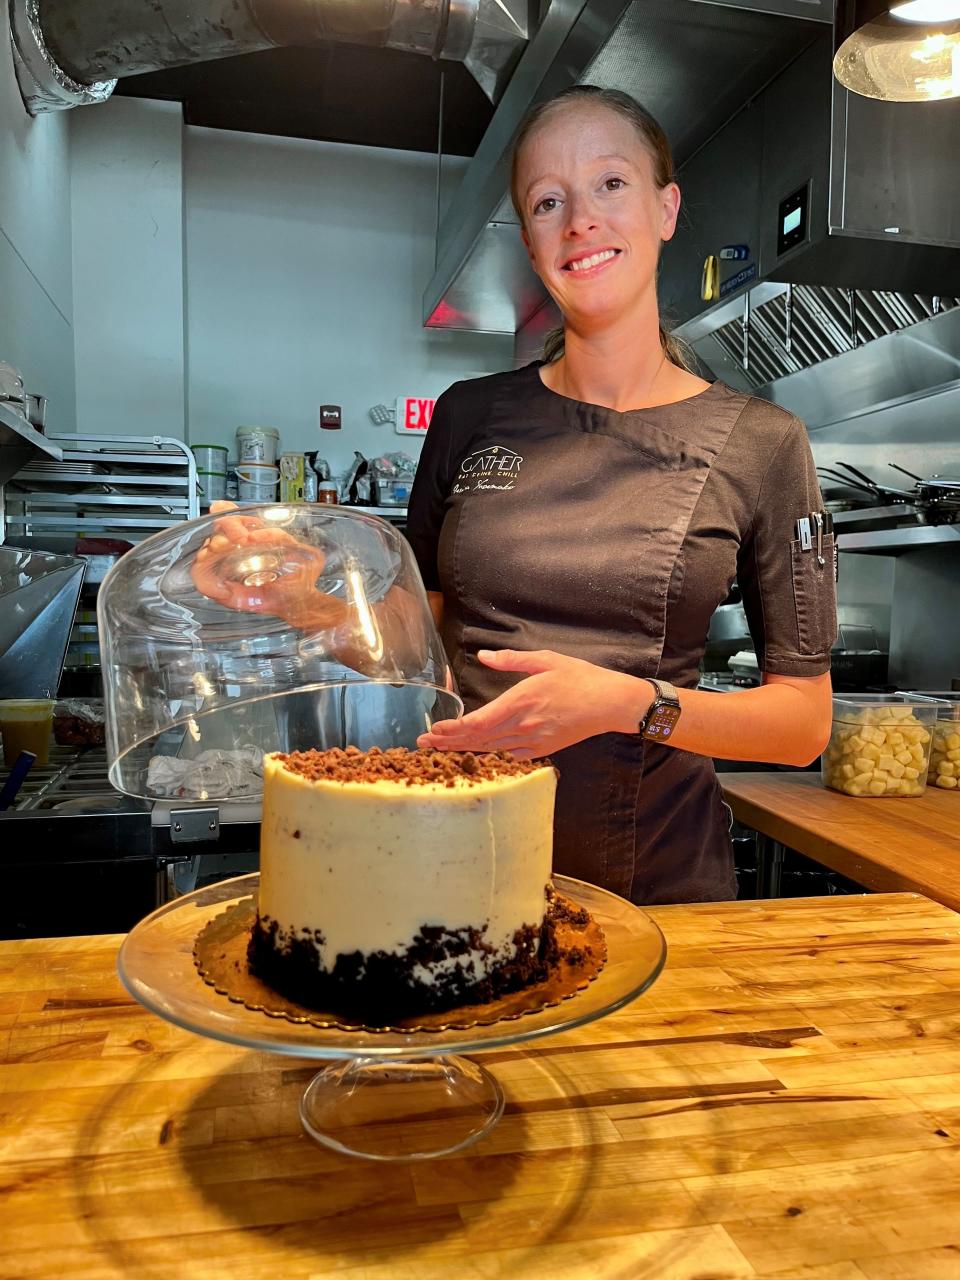 Jessica Shoemaker is the creative pastry chef/chef de cuisine at Next Door in Cape Coral.